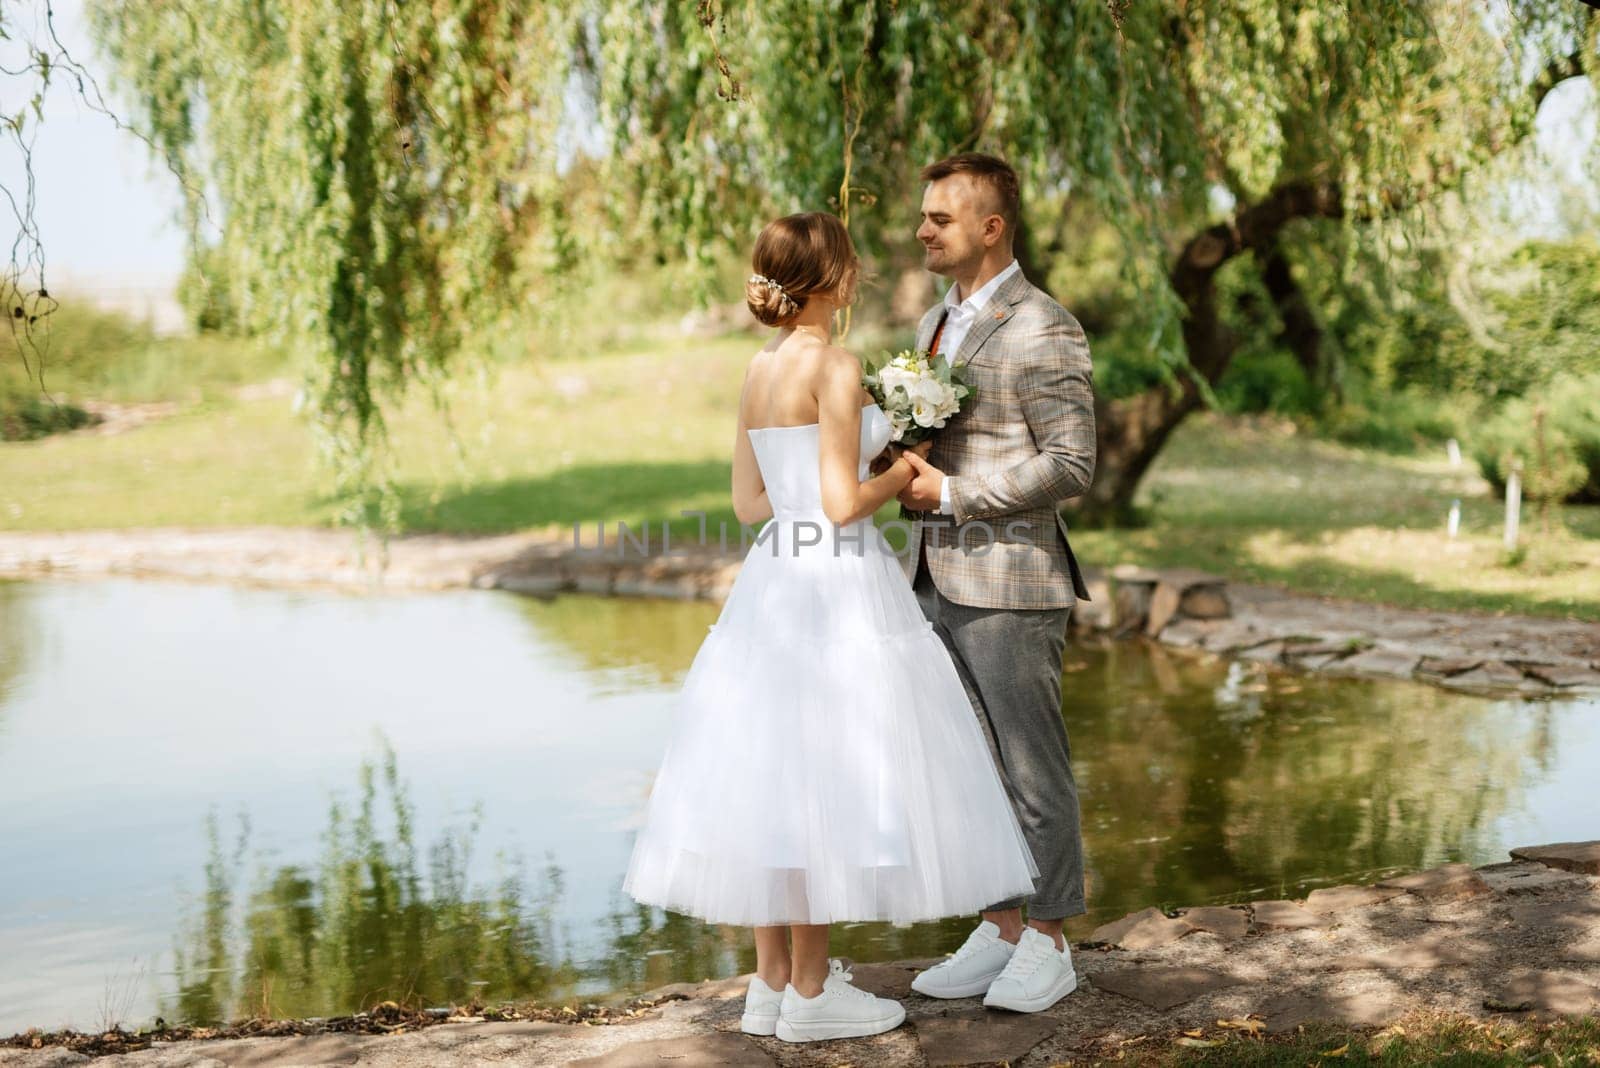 the first meeting of the bride and groom in wedding outfits in the park